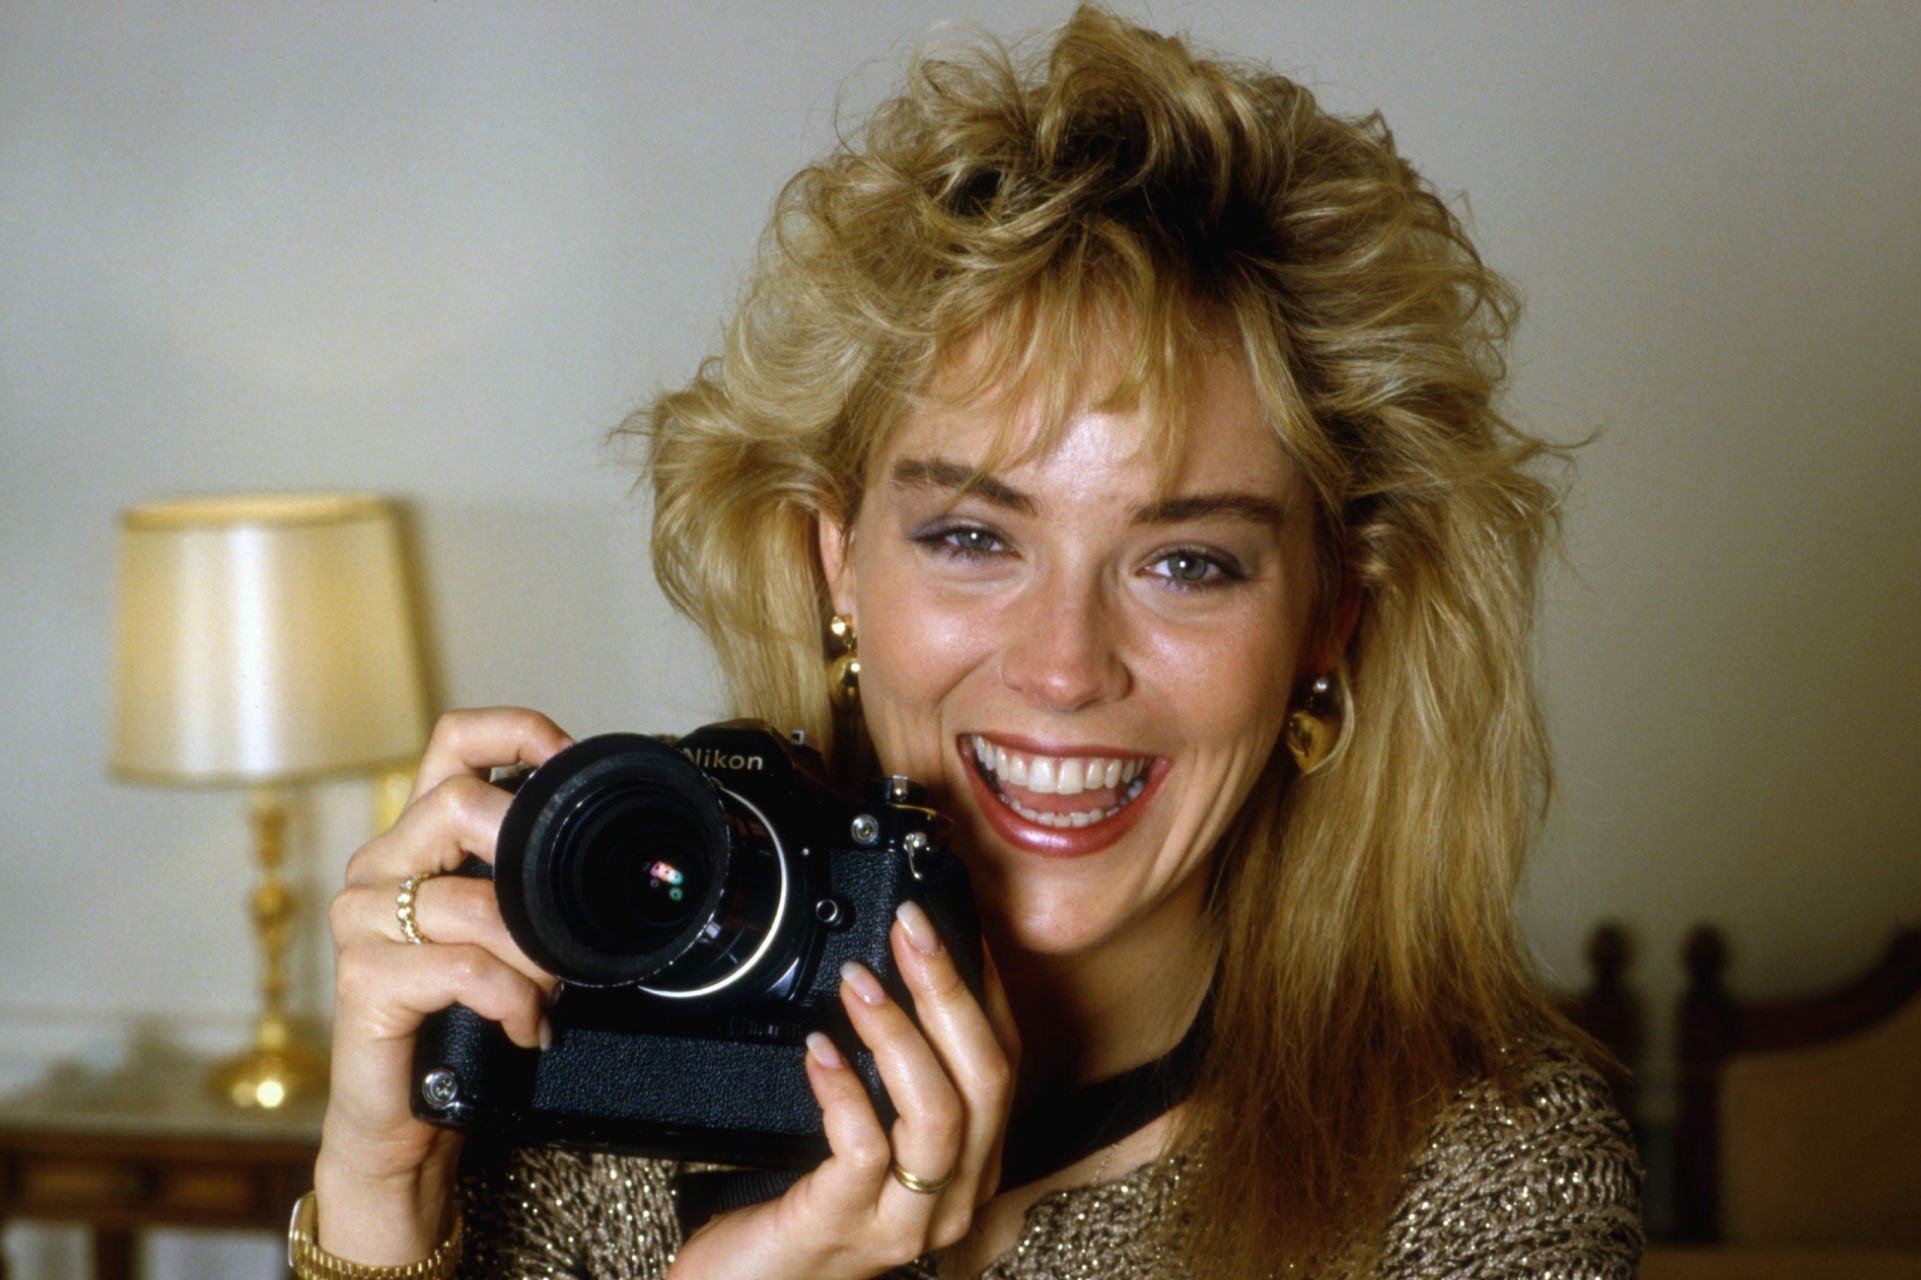 How many films with Sharon Stone do you know?